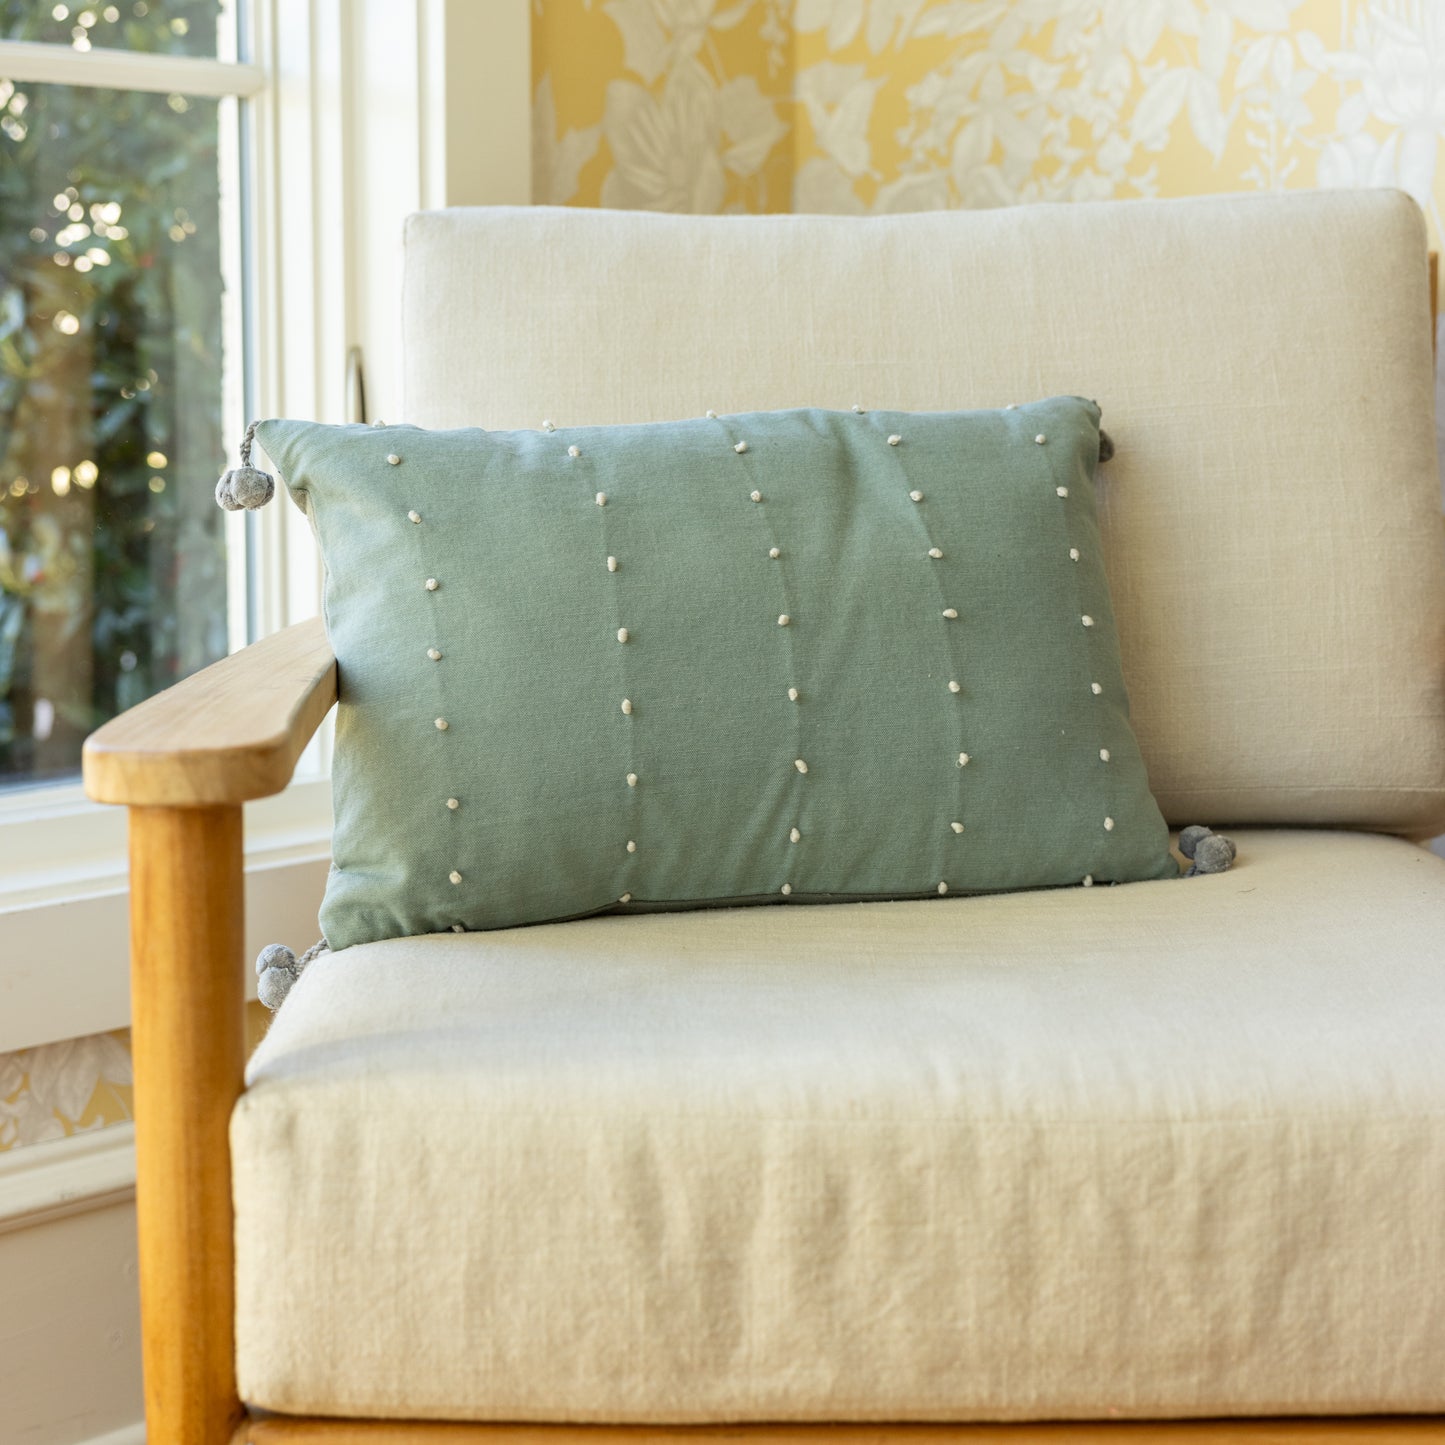 French Knot Pillow